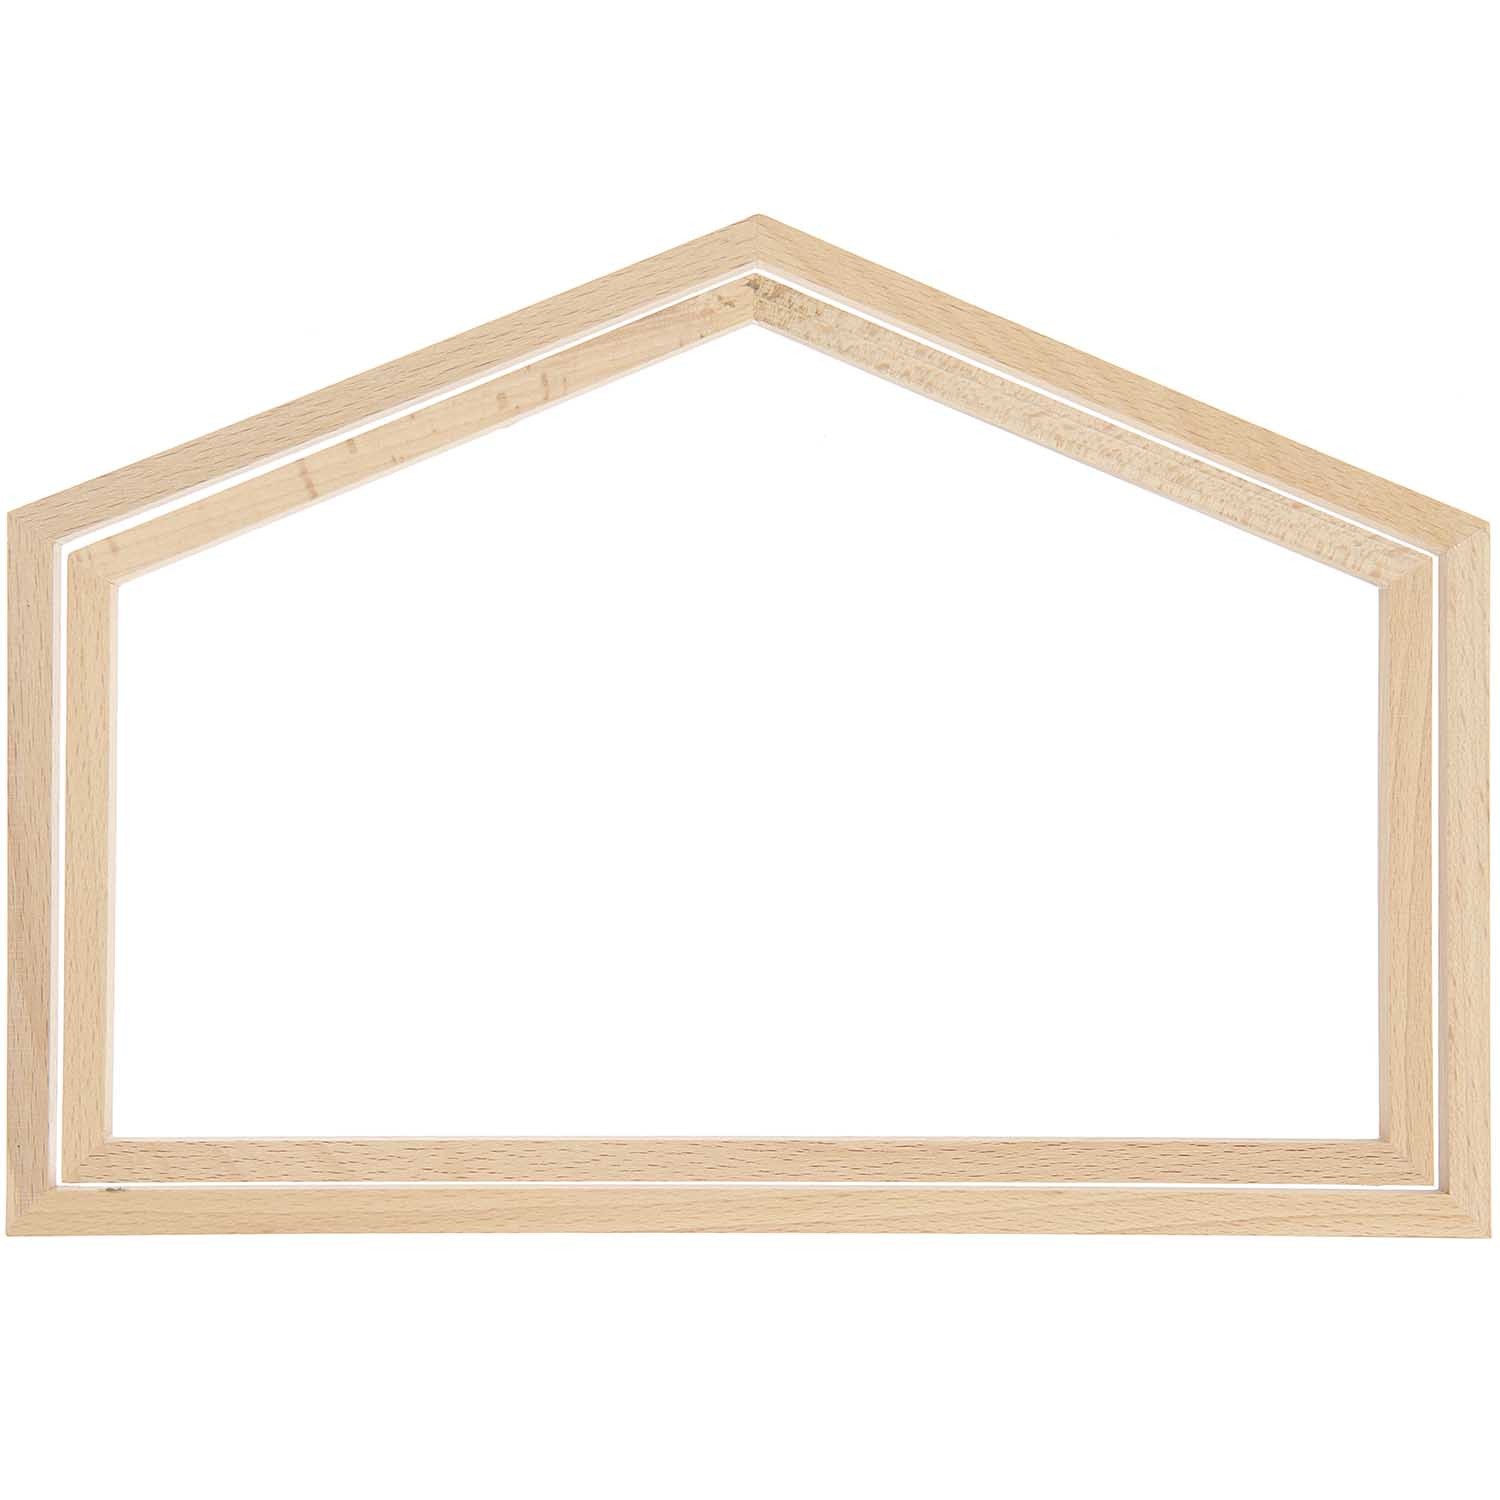 Rico Decorative Embroidery Frame - Wide House Large